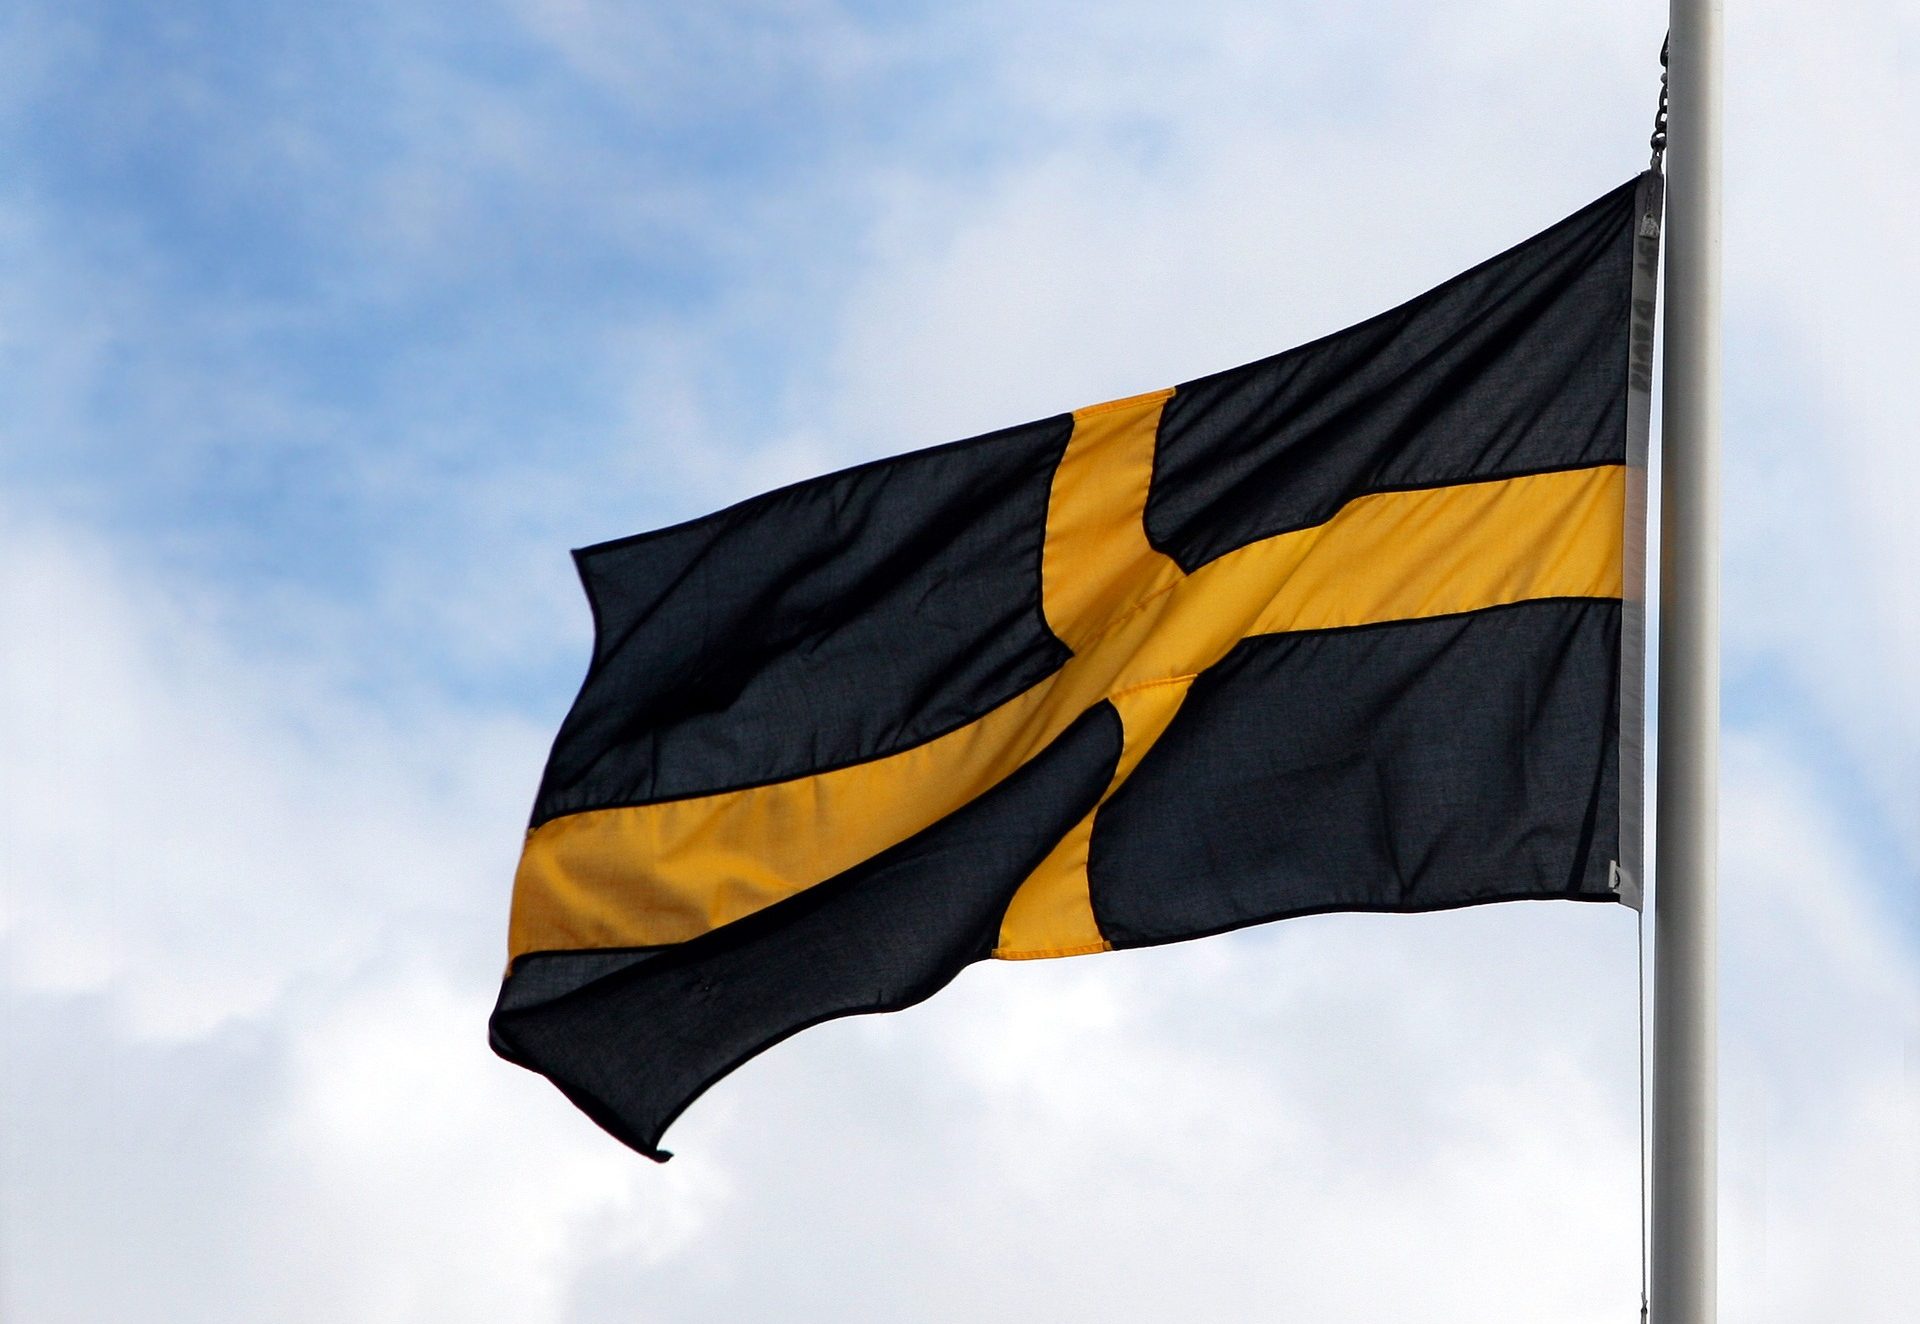 The Saltire was later replaced with the flag of Saint David, which features a different cross in black and yellow. 